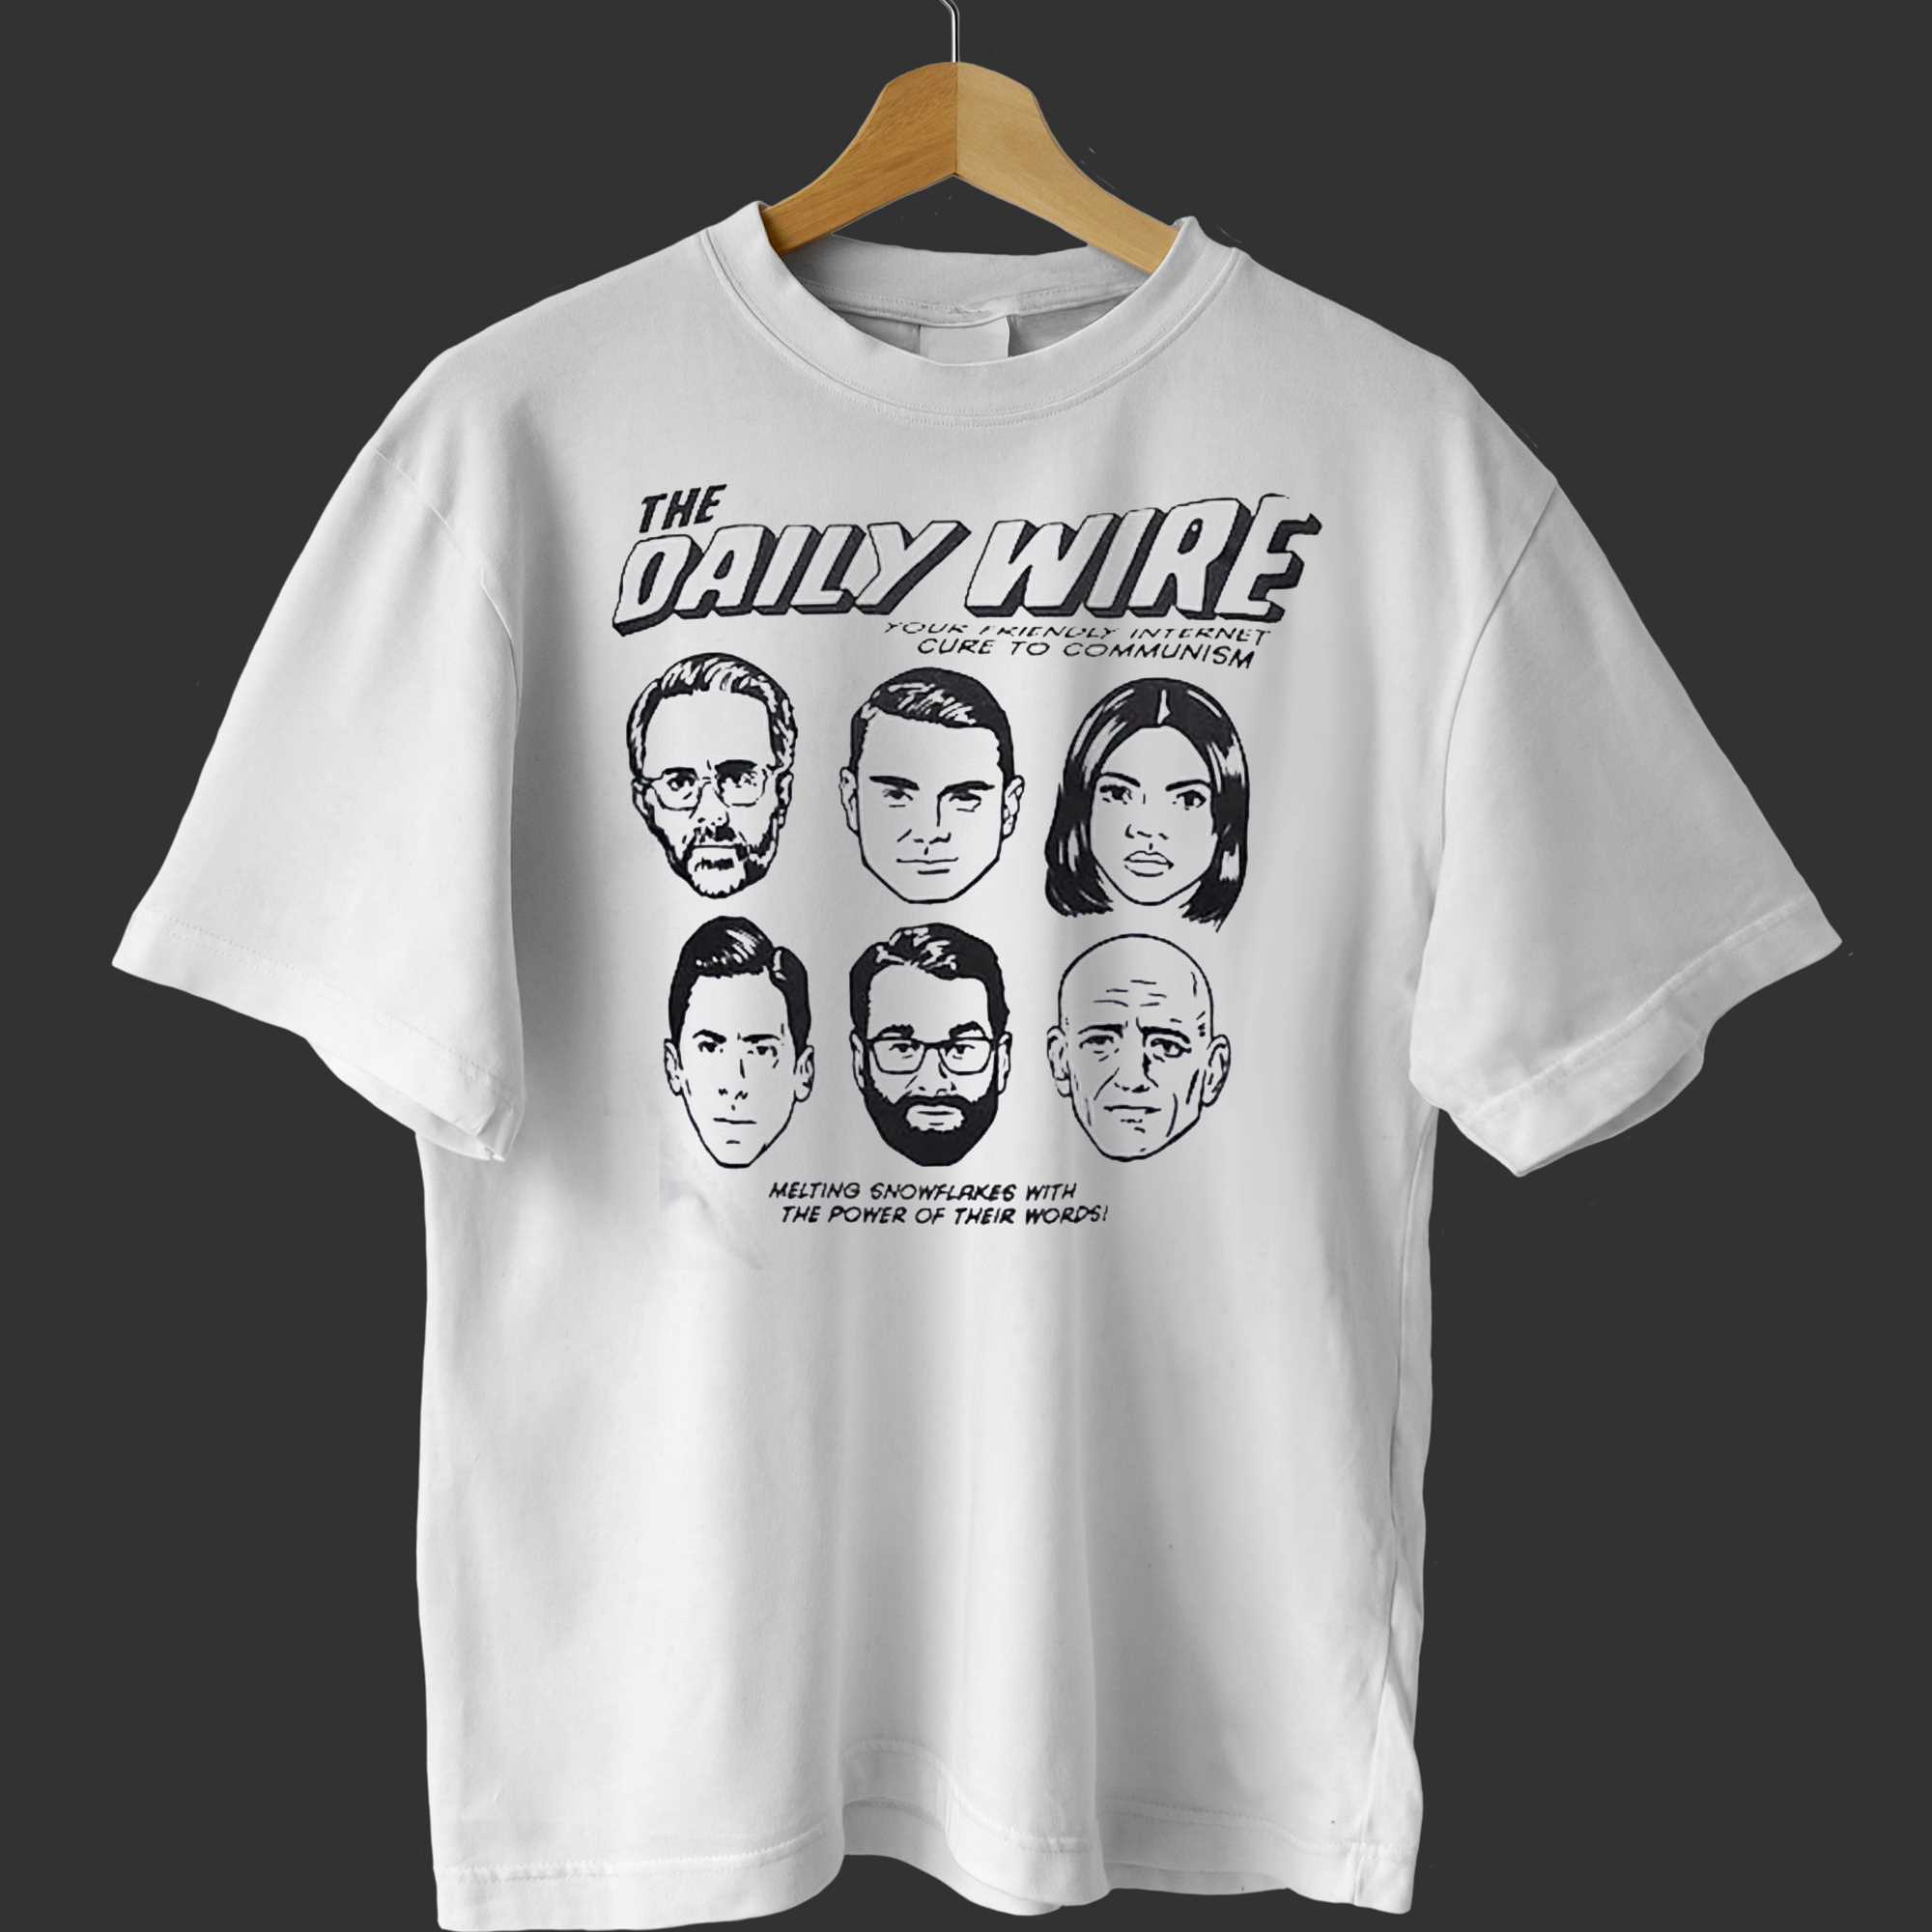 the daily wire t shirt 1